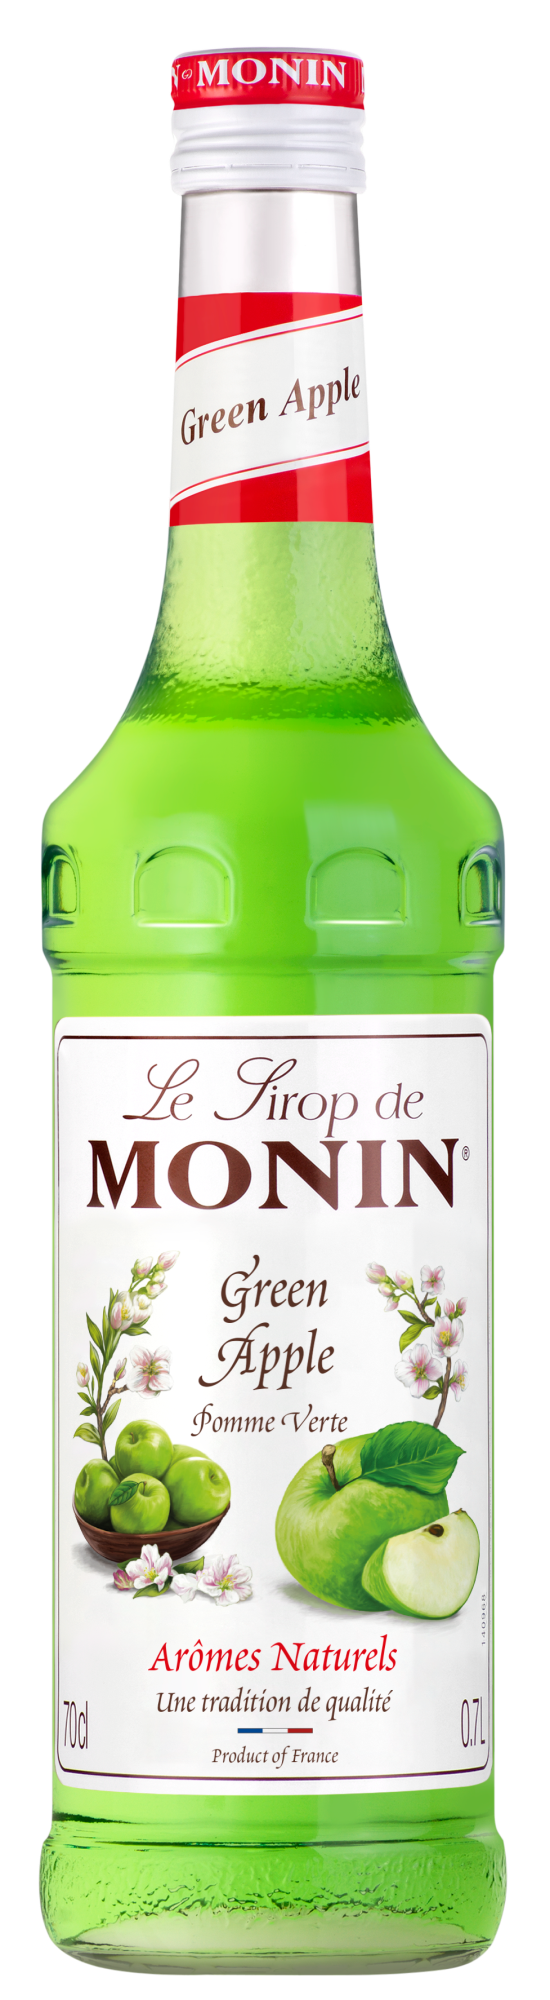 Buy MONIN Green Apple Syrup. It has a nose of  Fresh Granny Smith apple, with a sweet, yet crisp and slightly tart finish. 